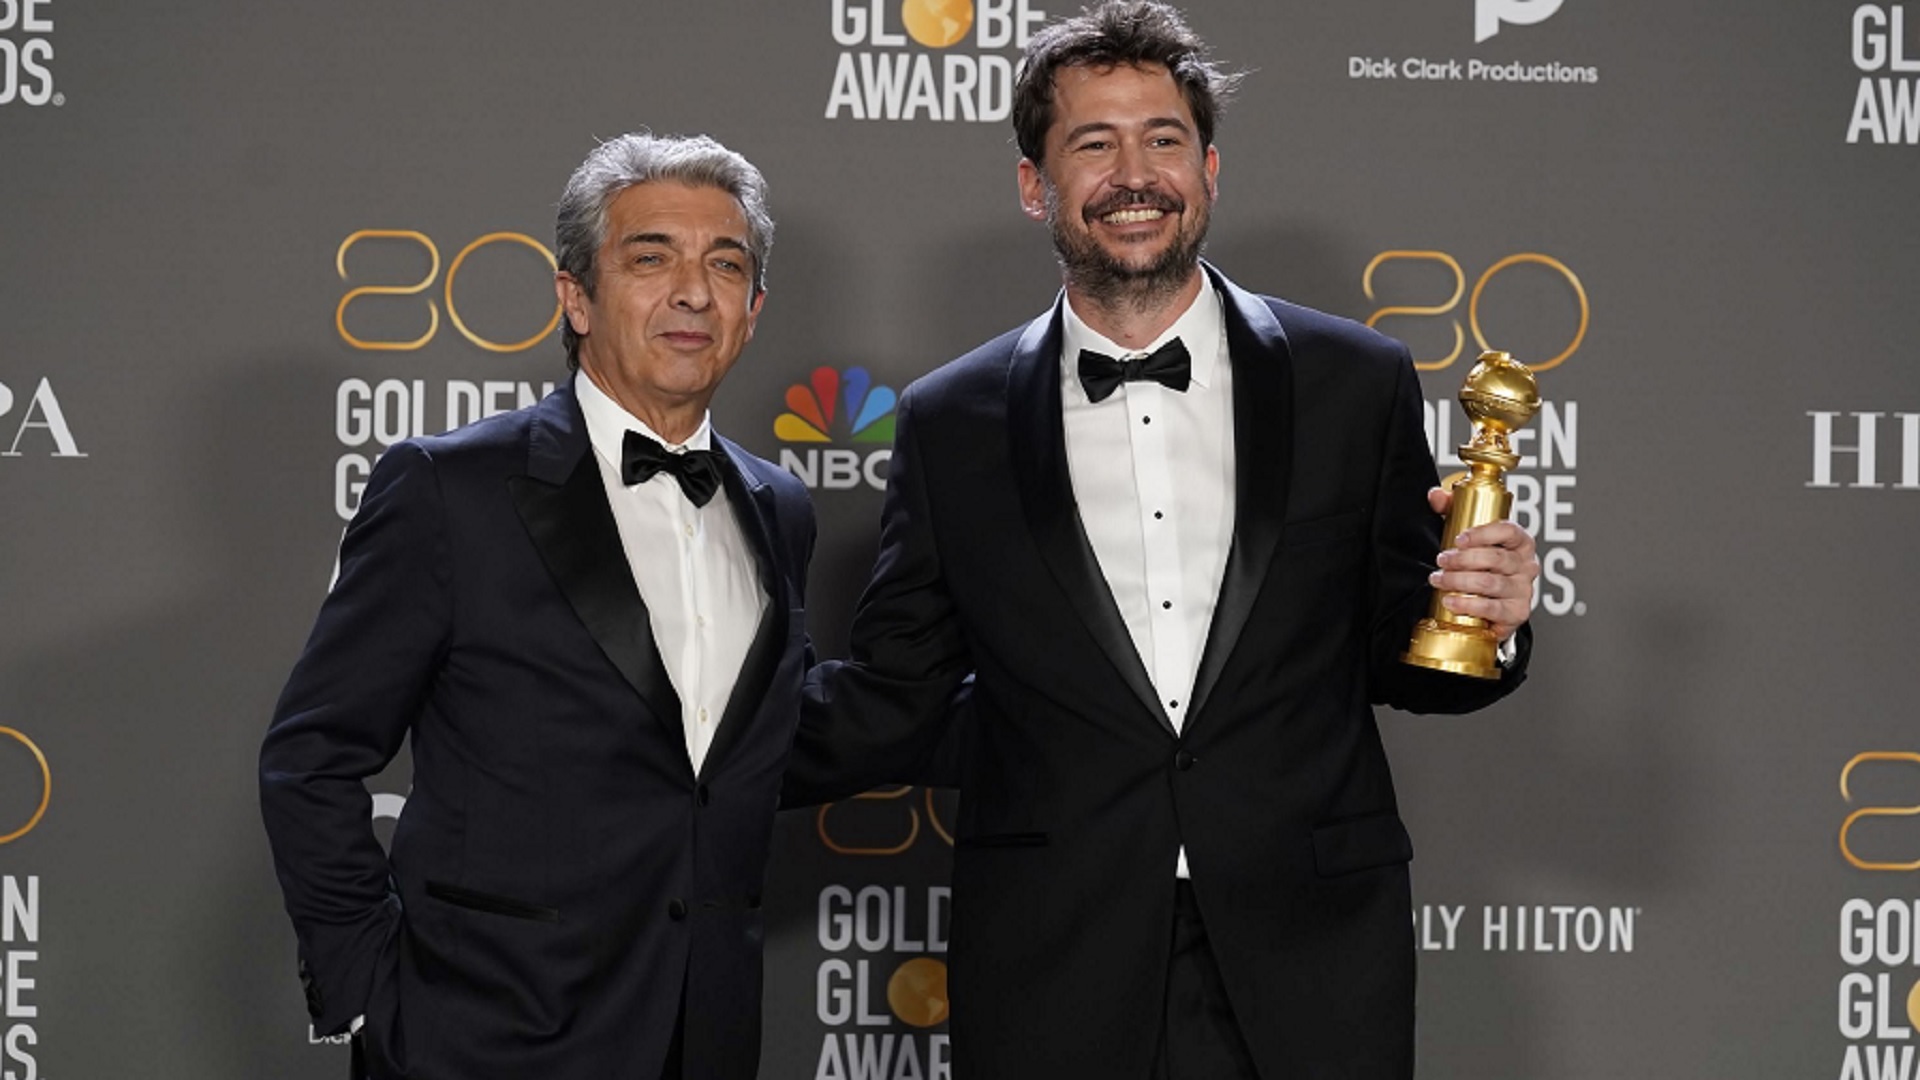 Santiago Miter and Ricardo Darín, at the time of exhibiting the Golden Globe obtained